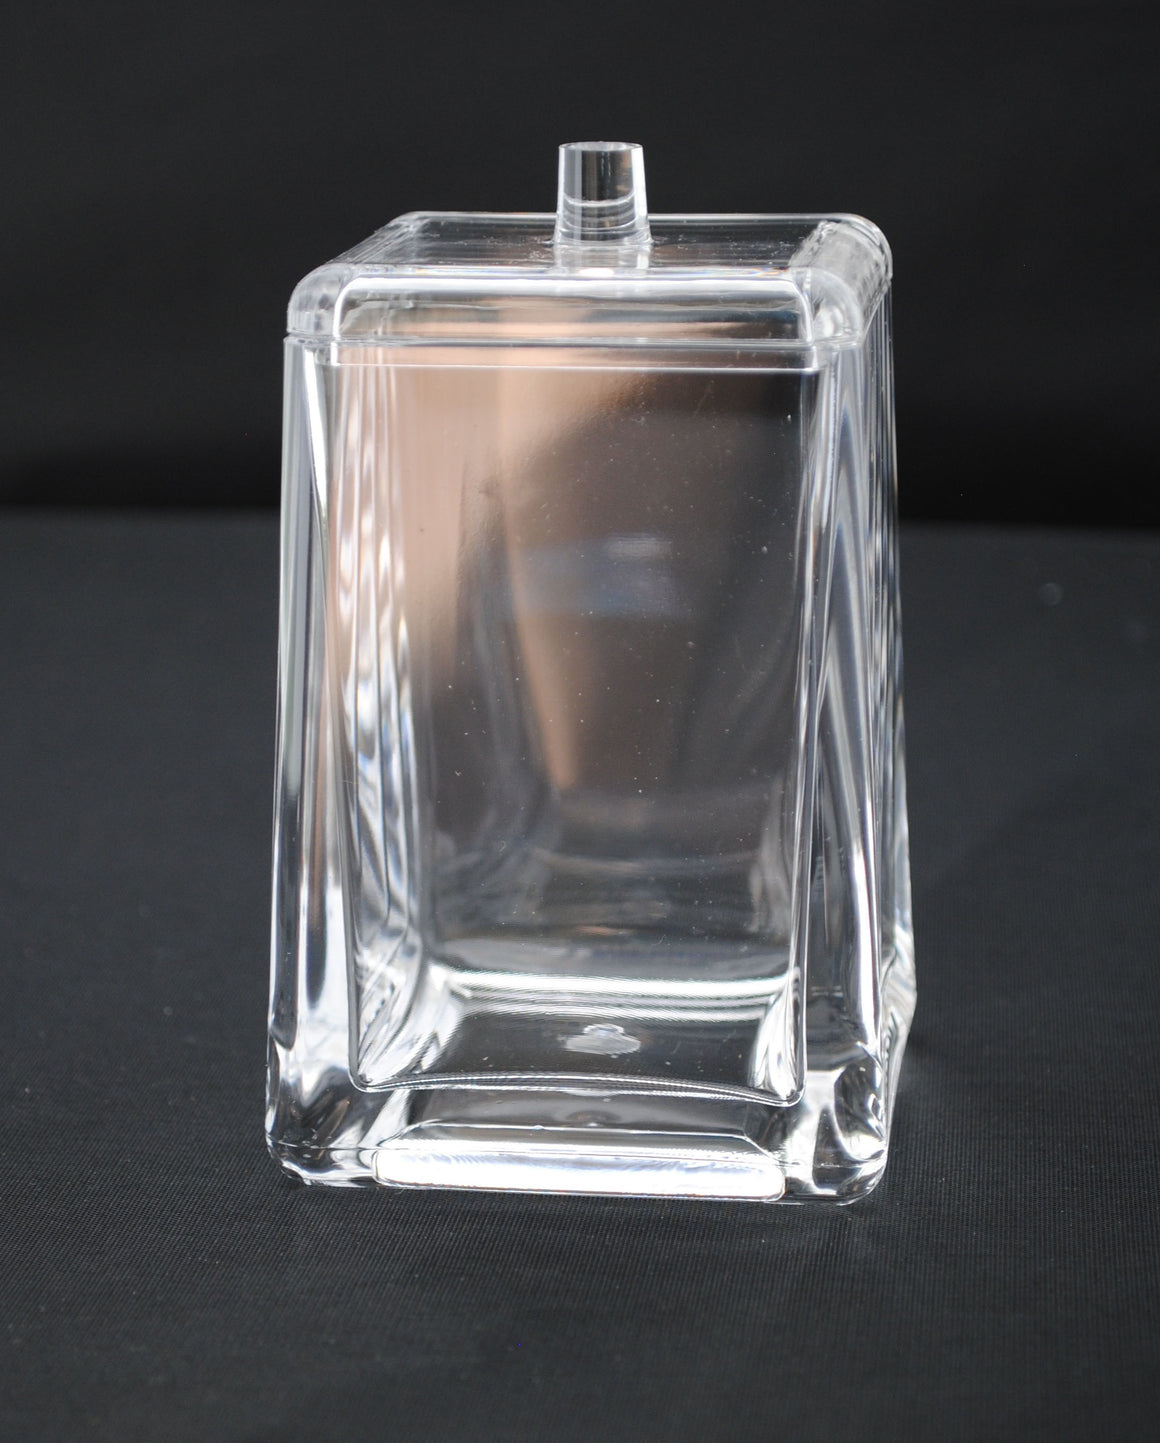 Acrylic lucite monogrammed container with lid bathroom accessory Q-tip holder cotton ball holder desk accessory 